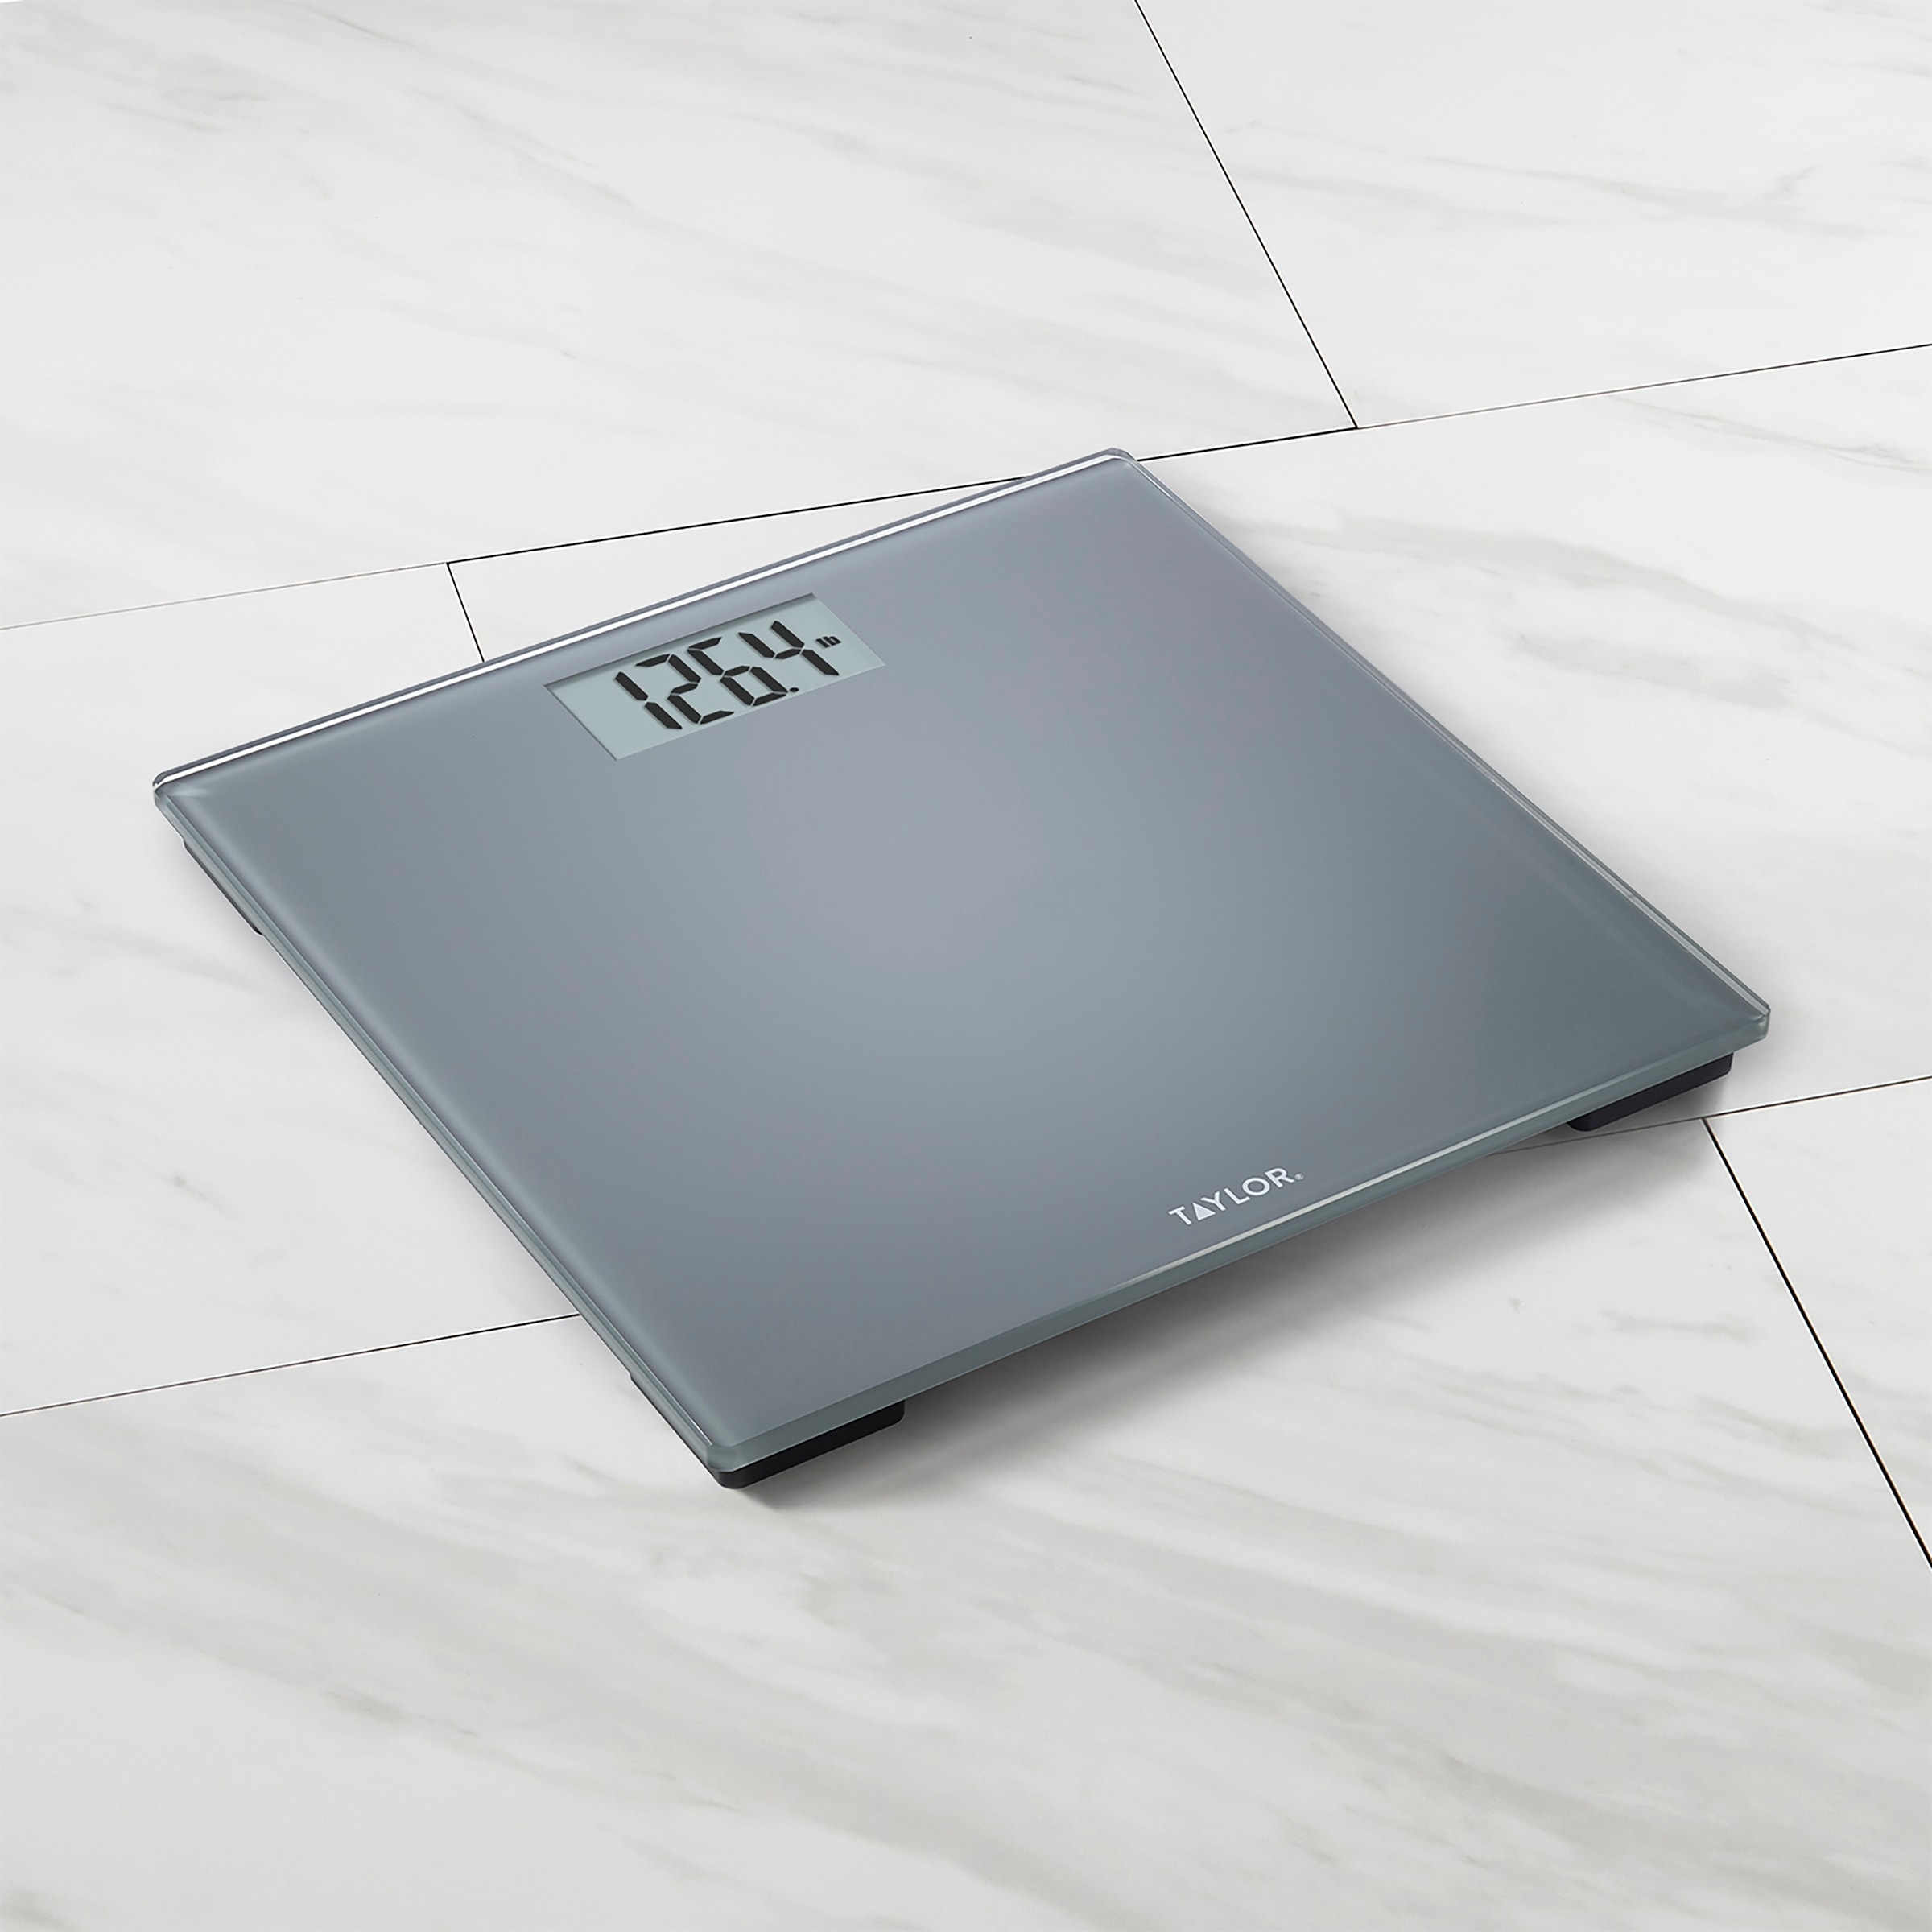 https://ak1.ostkcdn.com/images/products/is/images/direct/d9f8346dfbbe0b5ddb4626e77c45bccda8dbea08/Taylor-Digital-Glass-Bathroom-Scale-with-Charcoal-Finish.jpg